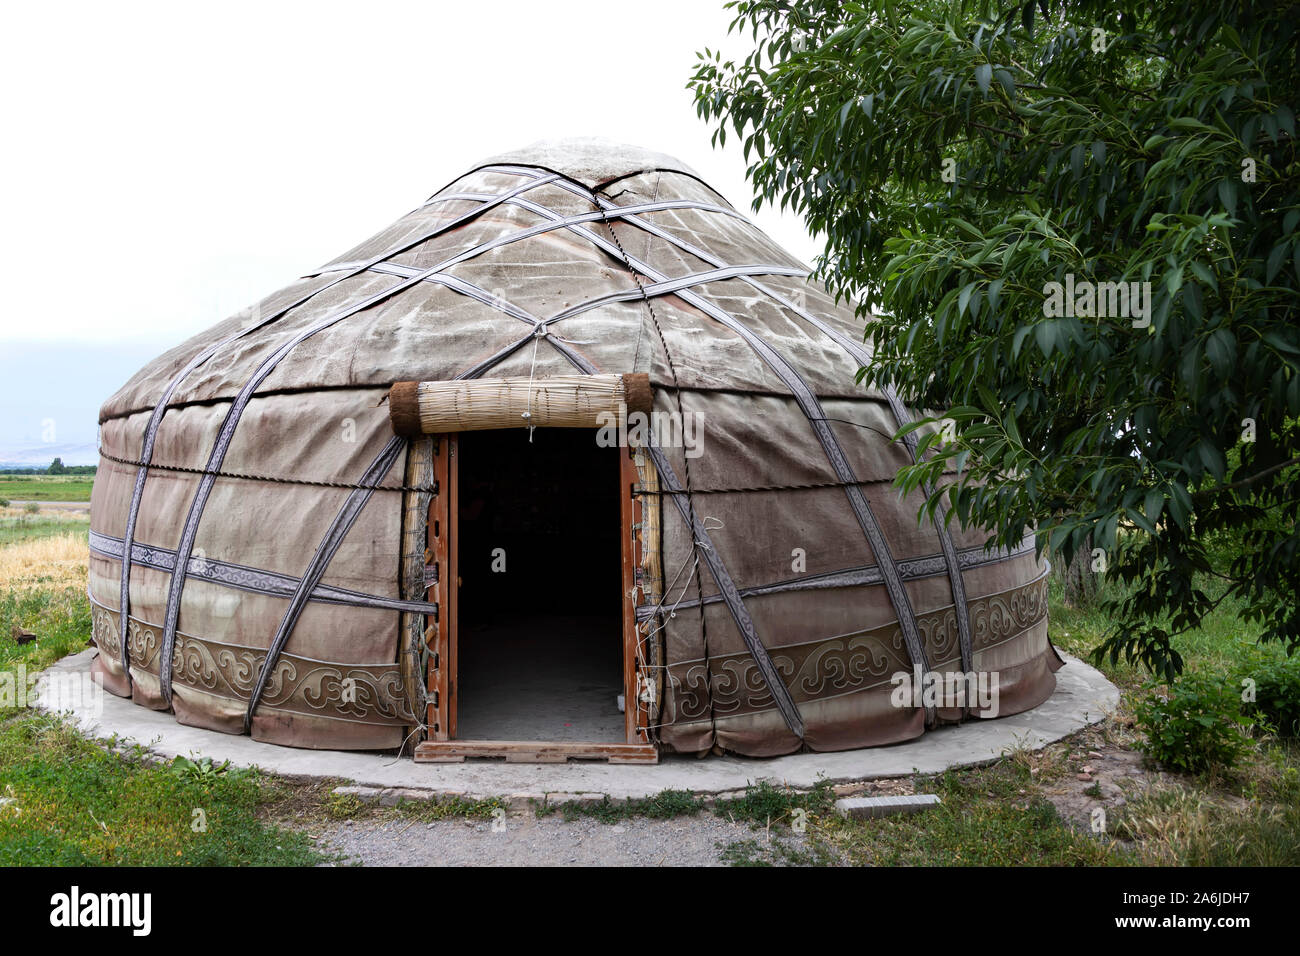 White yurt with an open entrance next to a tree. Kyrgyzstan Stock Photo